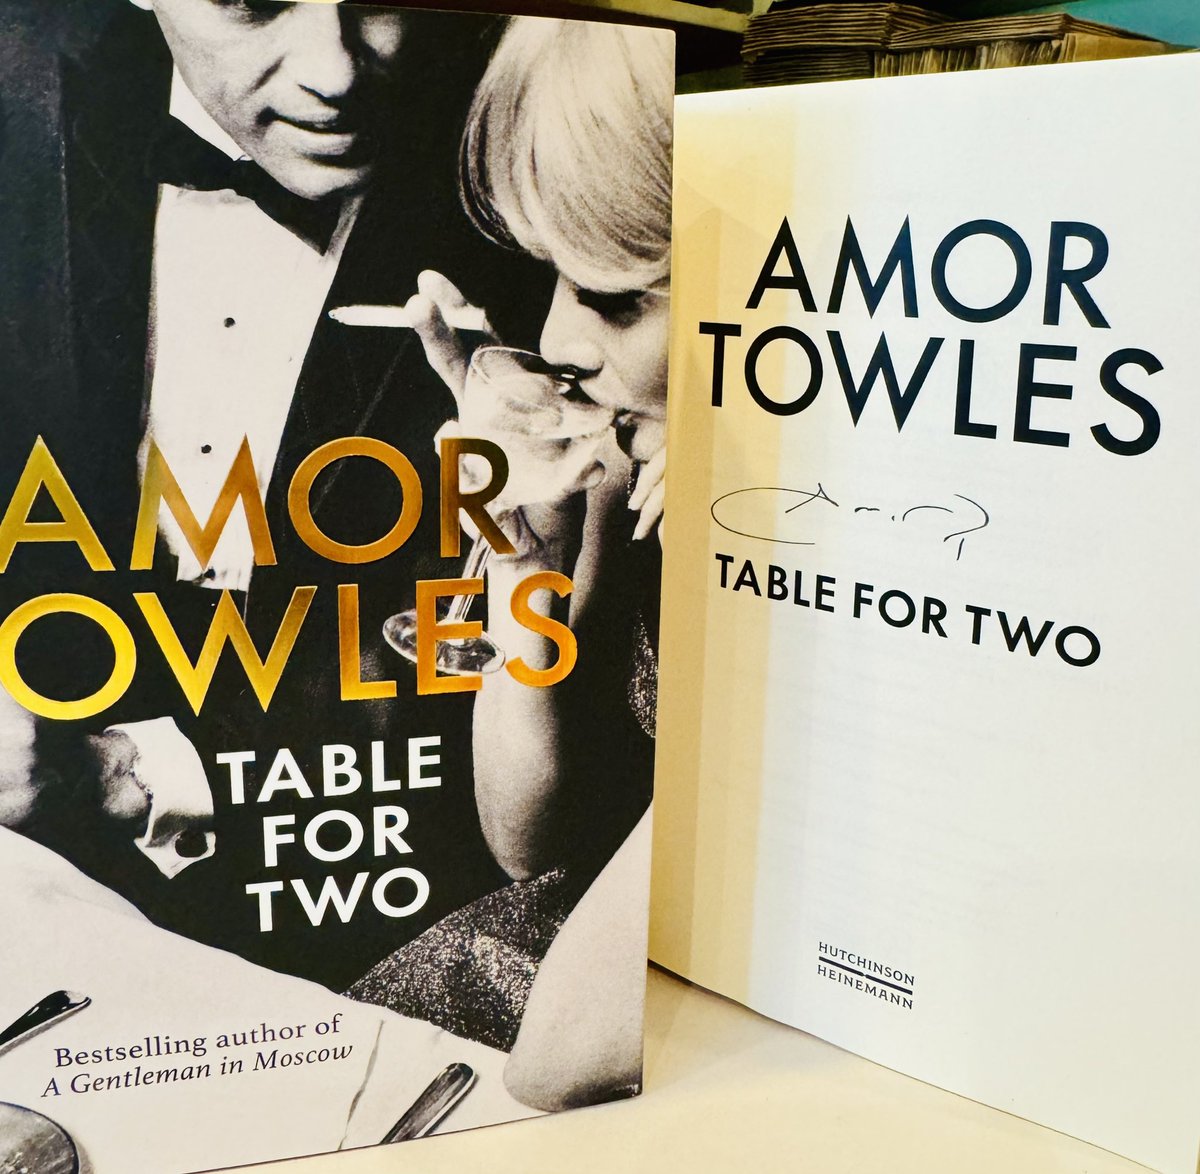 We have some #signed #indie #bookshop editions of Table For Two by @amortowles ⭐️⭐️ Amor Towles fans are in for a treat as he shares some of his shorter fiction: six stories based in New York City and a novella set in Golden Age Hollywood ⭐️⭐️ foxlanebooks.co.uk/product-page/p…